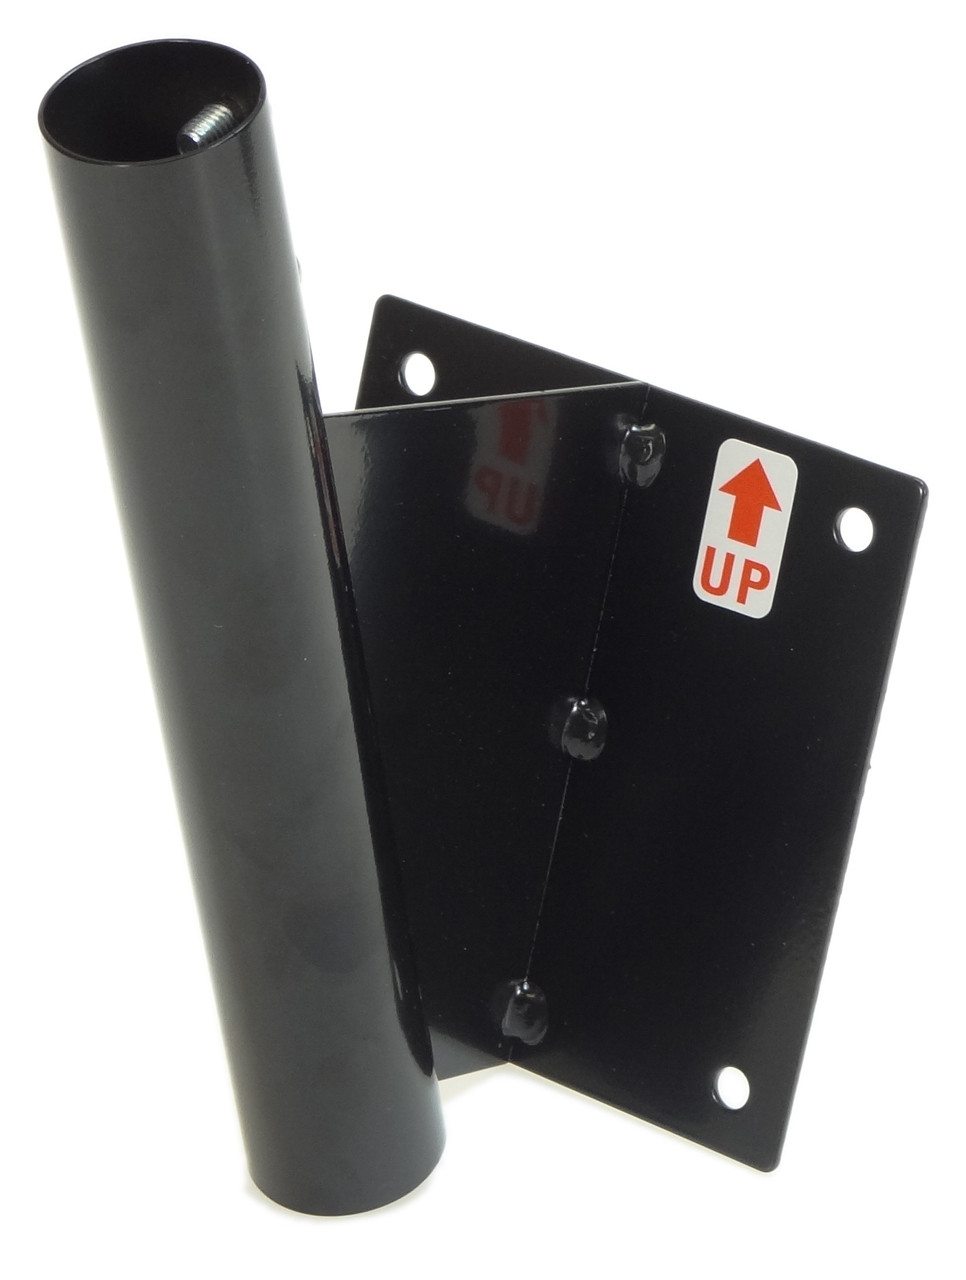 Bracket  is 4.5 inches wide and 4.87 inches tall.  Mounting diameter of hole is .345
Can be used with 18 and 24 inch fans.